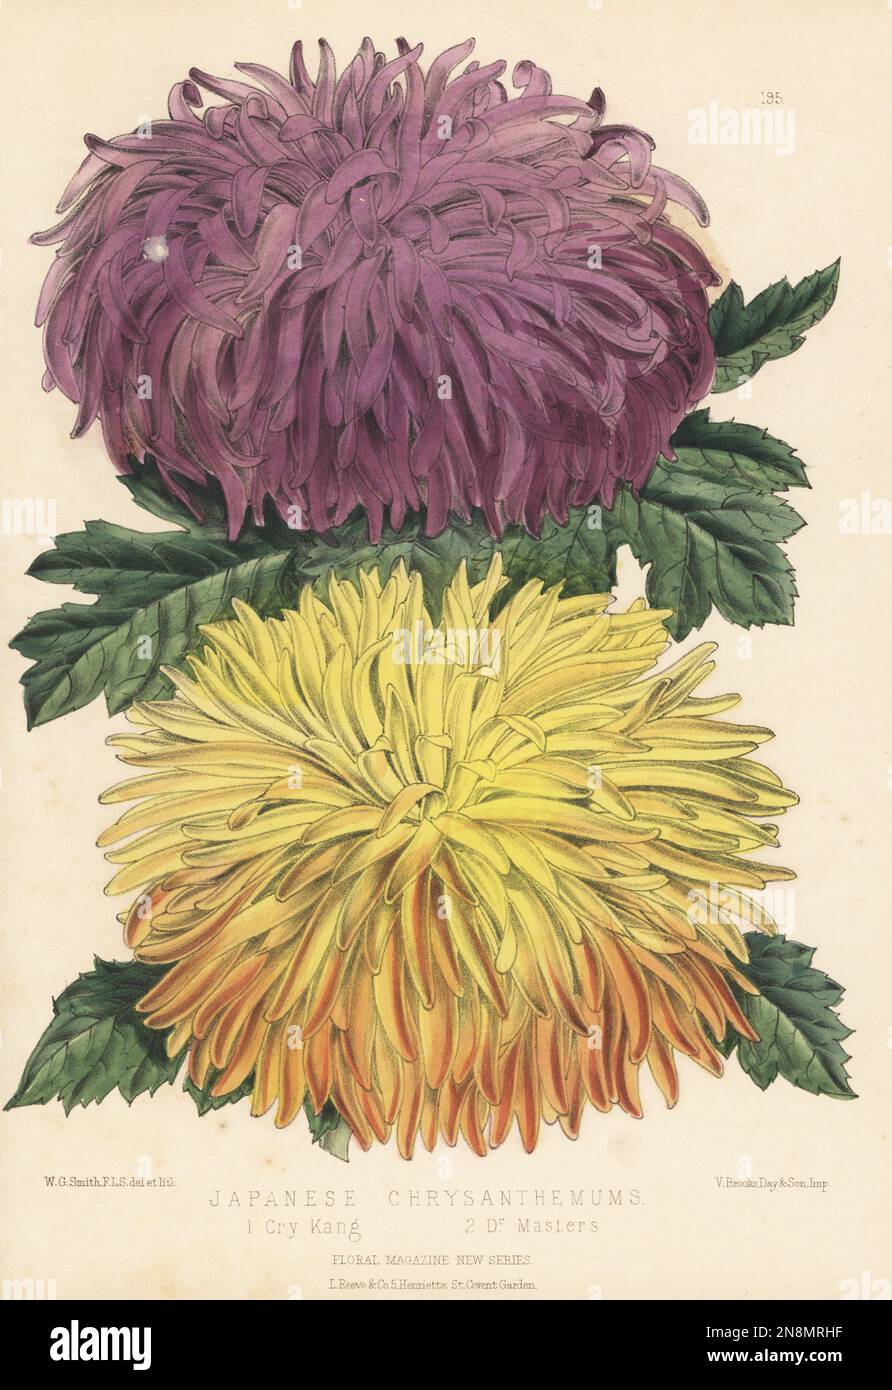 Japanese chrysanthemum cultivars, Cry Kang and Dr Masters. Sold by James Veitch and Sons, Chelsea. Handcolored botanical illustration drawn and lithographed by Worthington George Smith from Henry Honywood Dombrain's Floral Magazine, New Series, Volume 5, L. Reeve, London, 1876. Lithograph printed by Vincent Brooks, Day & Son. Stock Photo